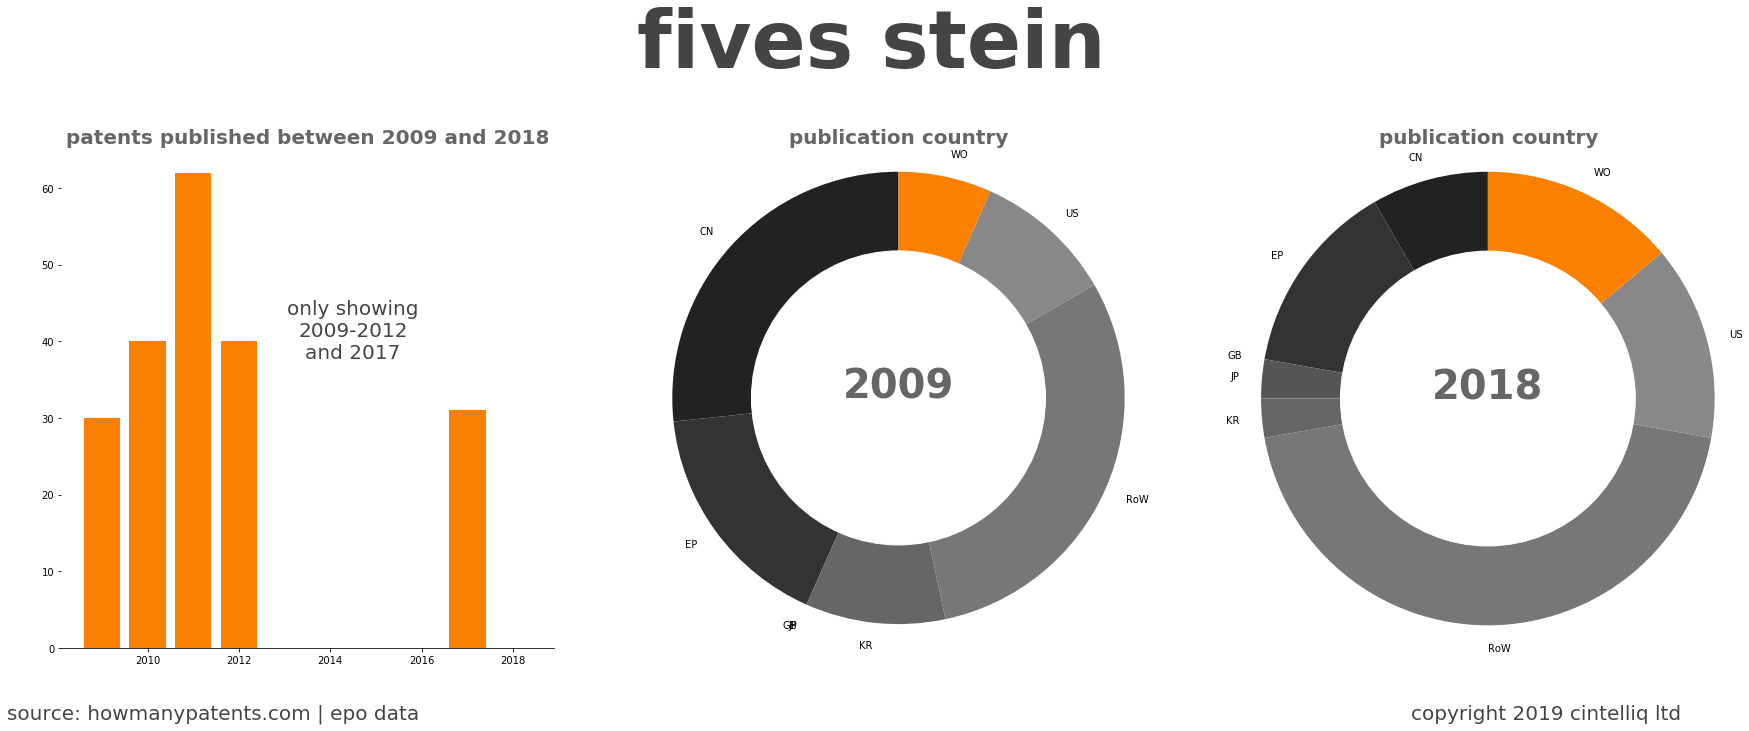 summary of patents for Fives Stein